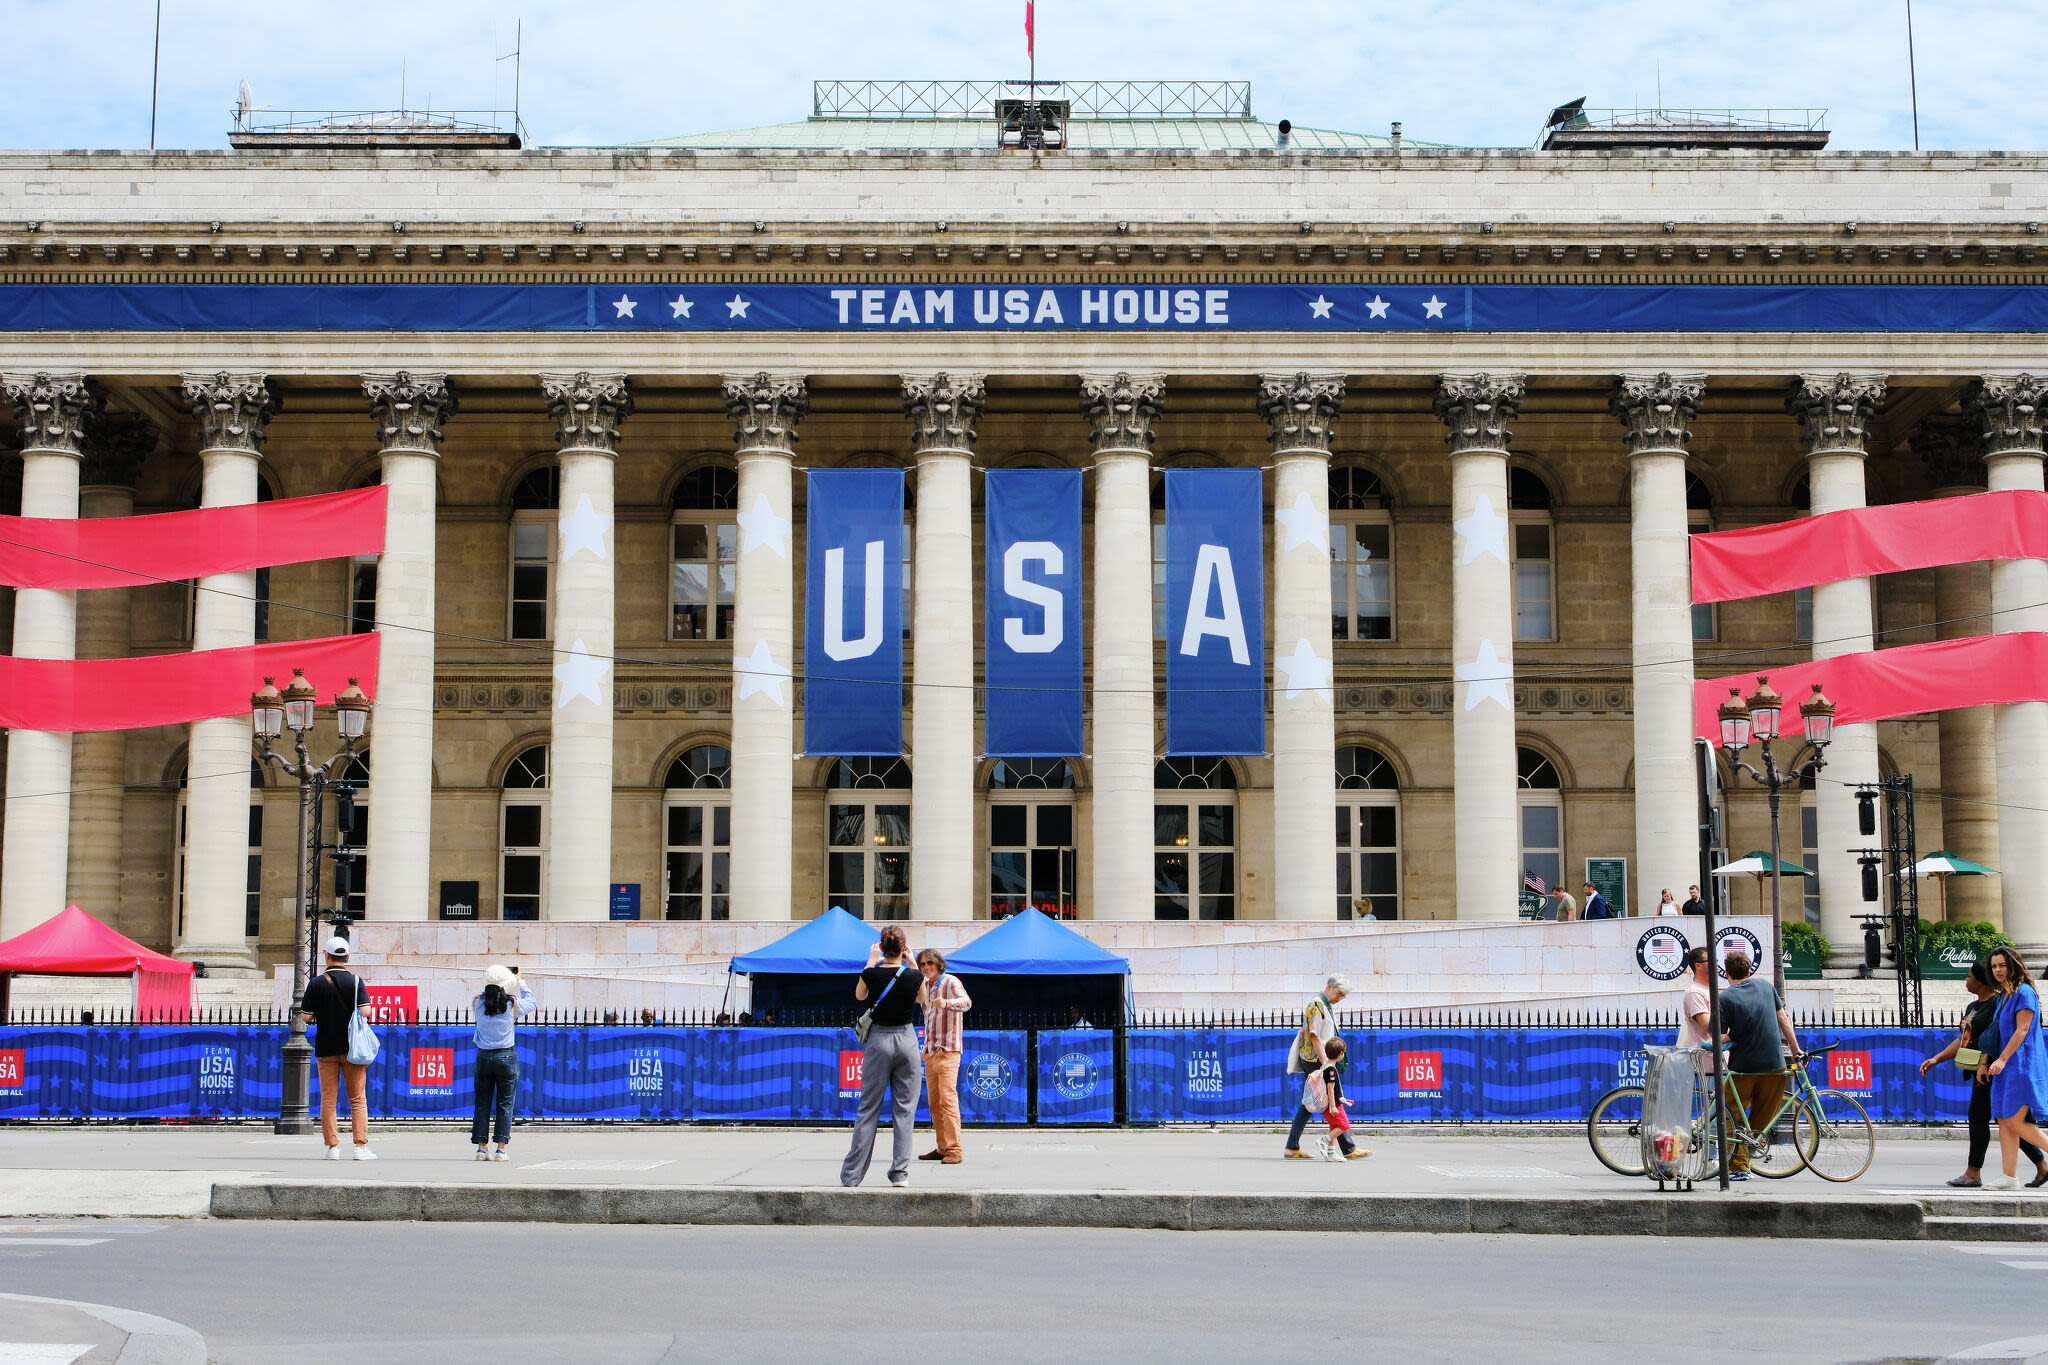 The Olympics' most American thing is Team USA's house for rich people